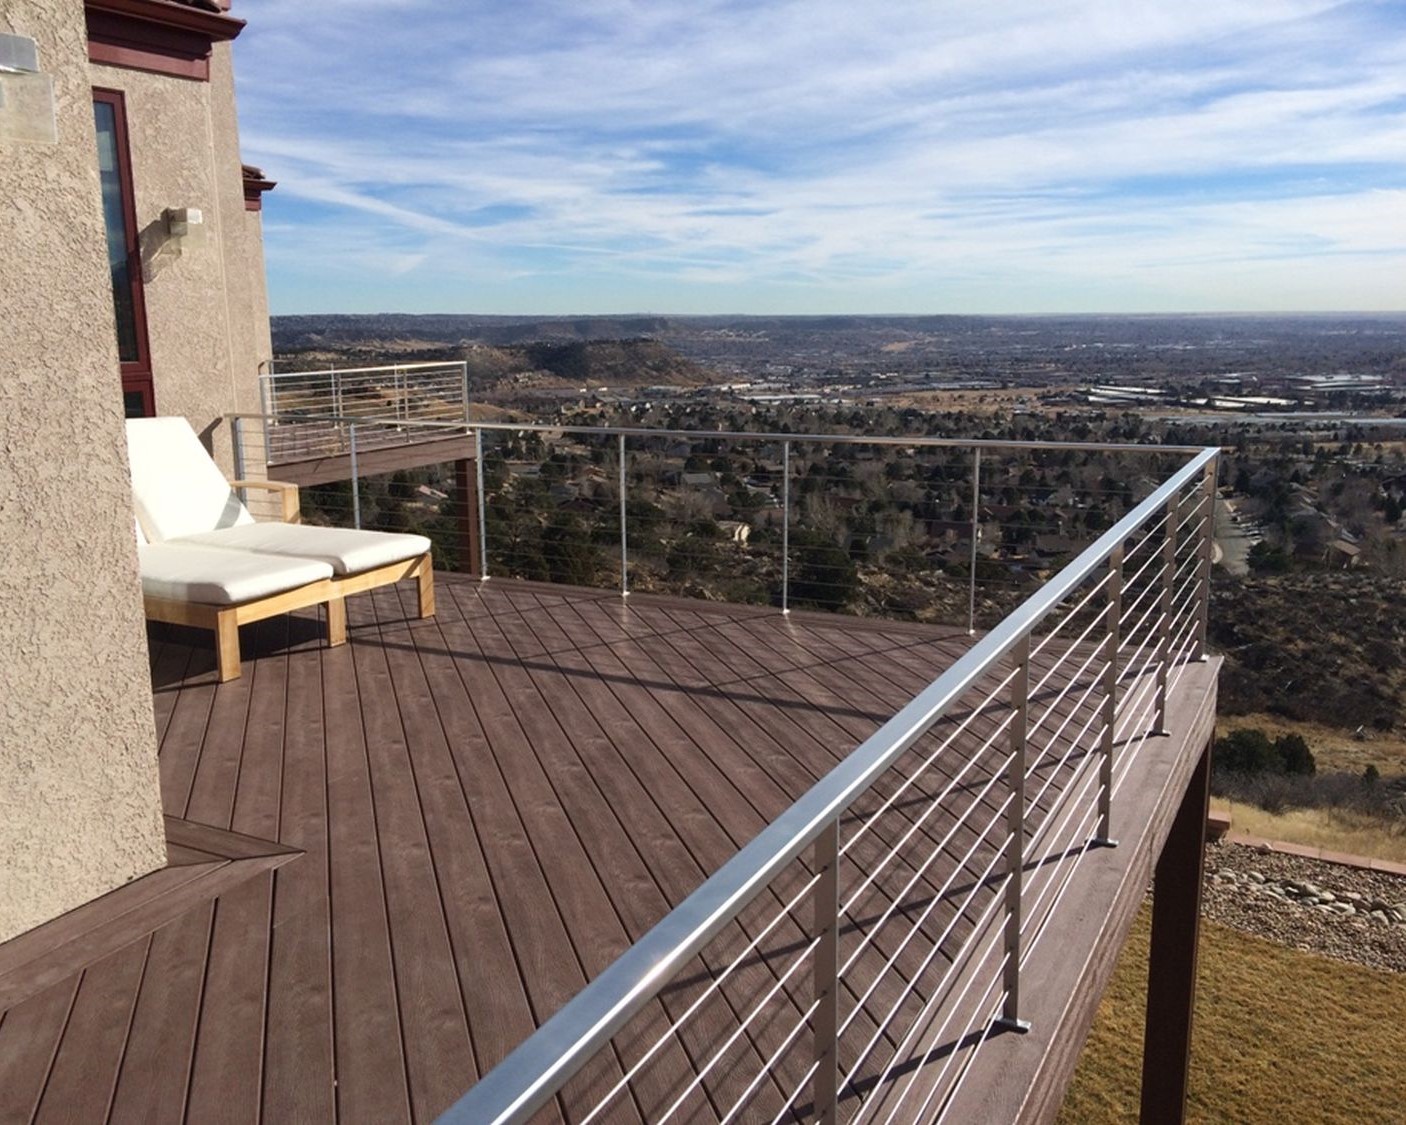 Composite deck with the boards laid at 45 degrees and a metal railing with stainless steel, horizontal cables.